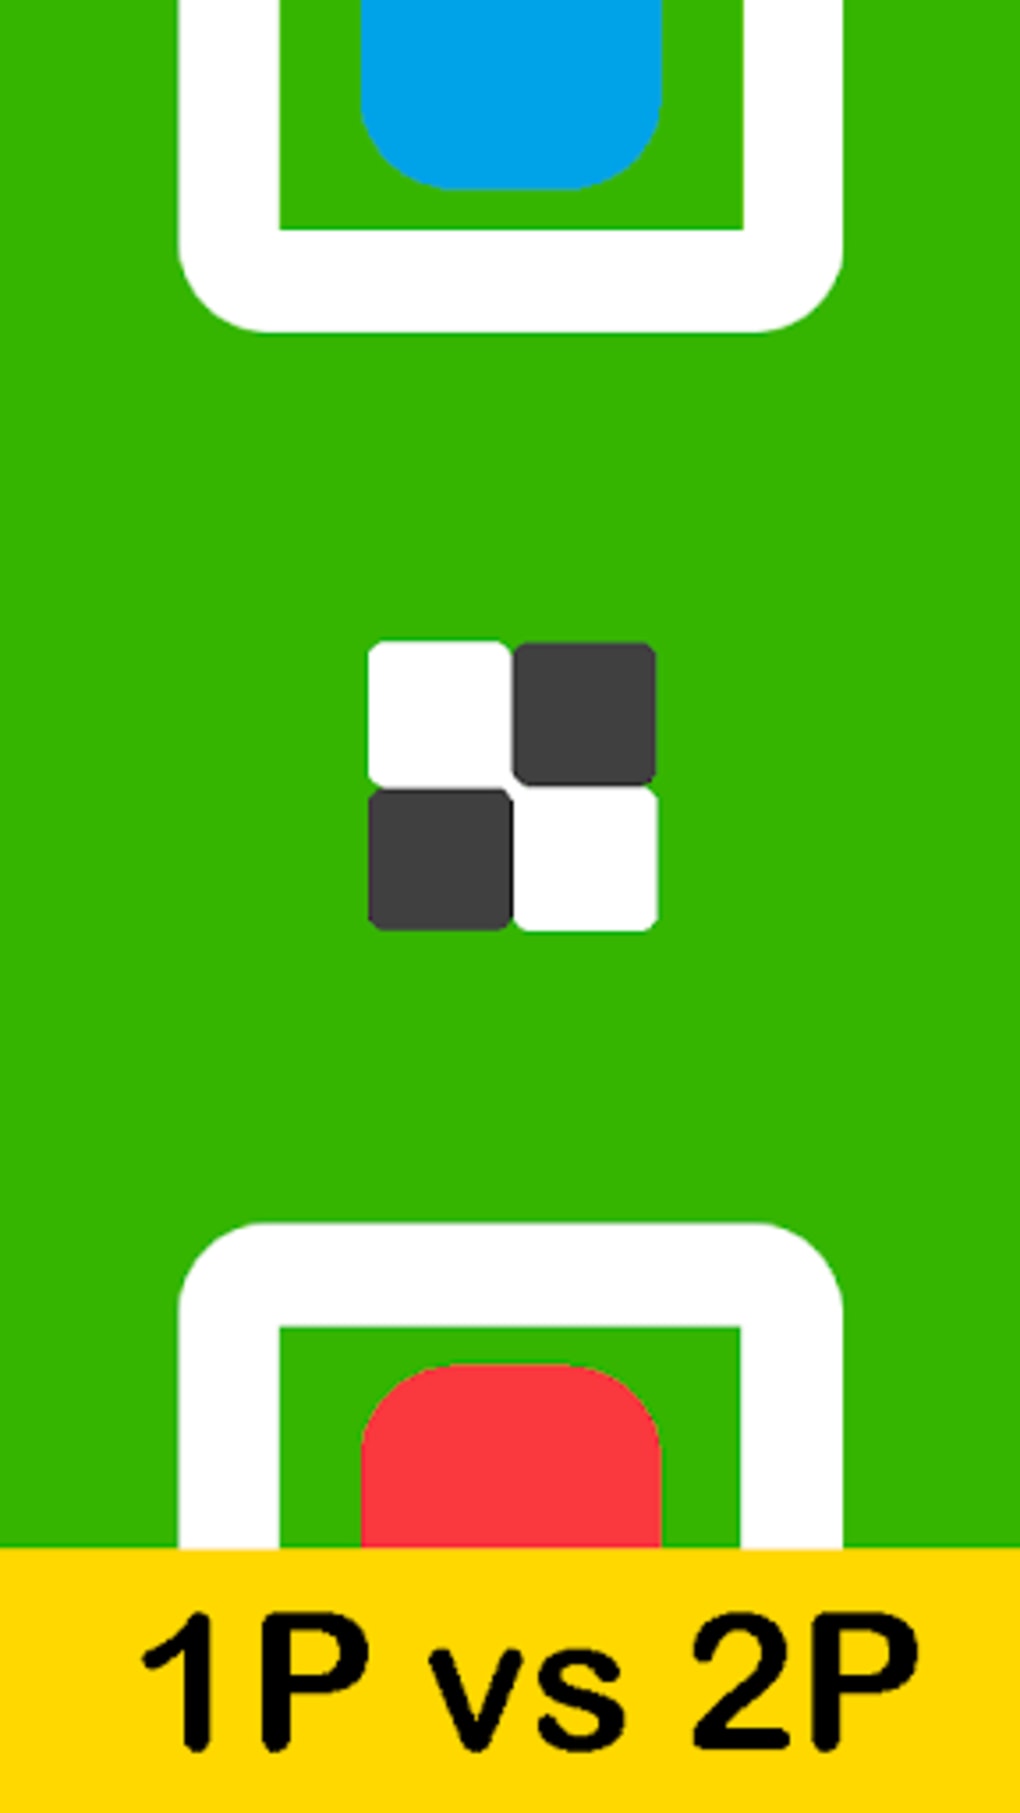 TWOPLAY - 2 player games – Apps on Google Play